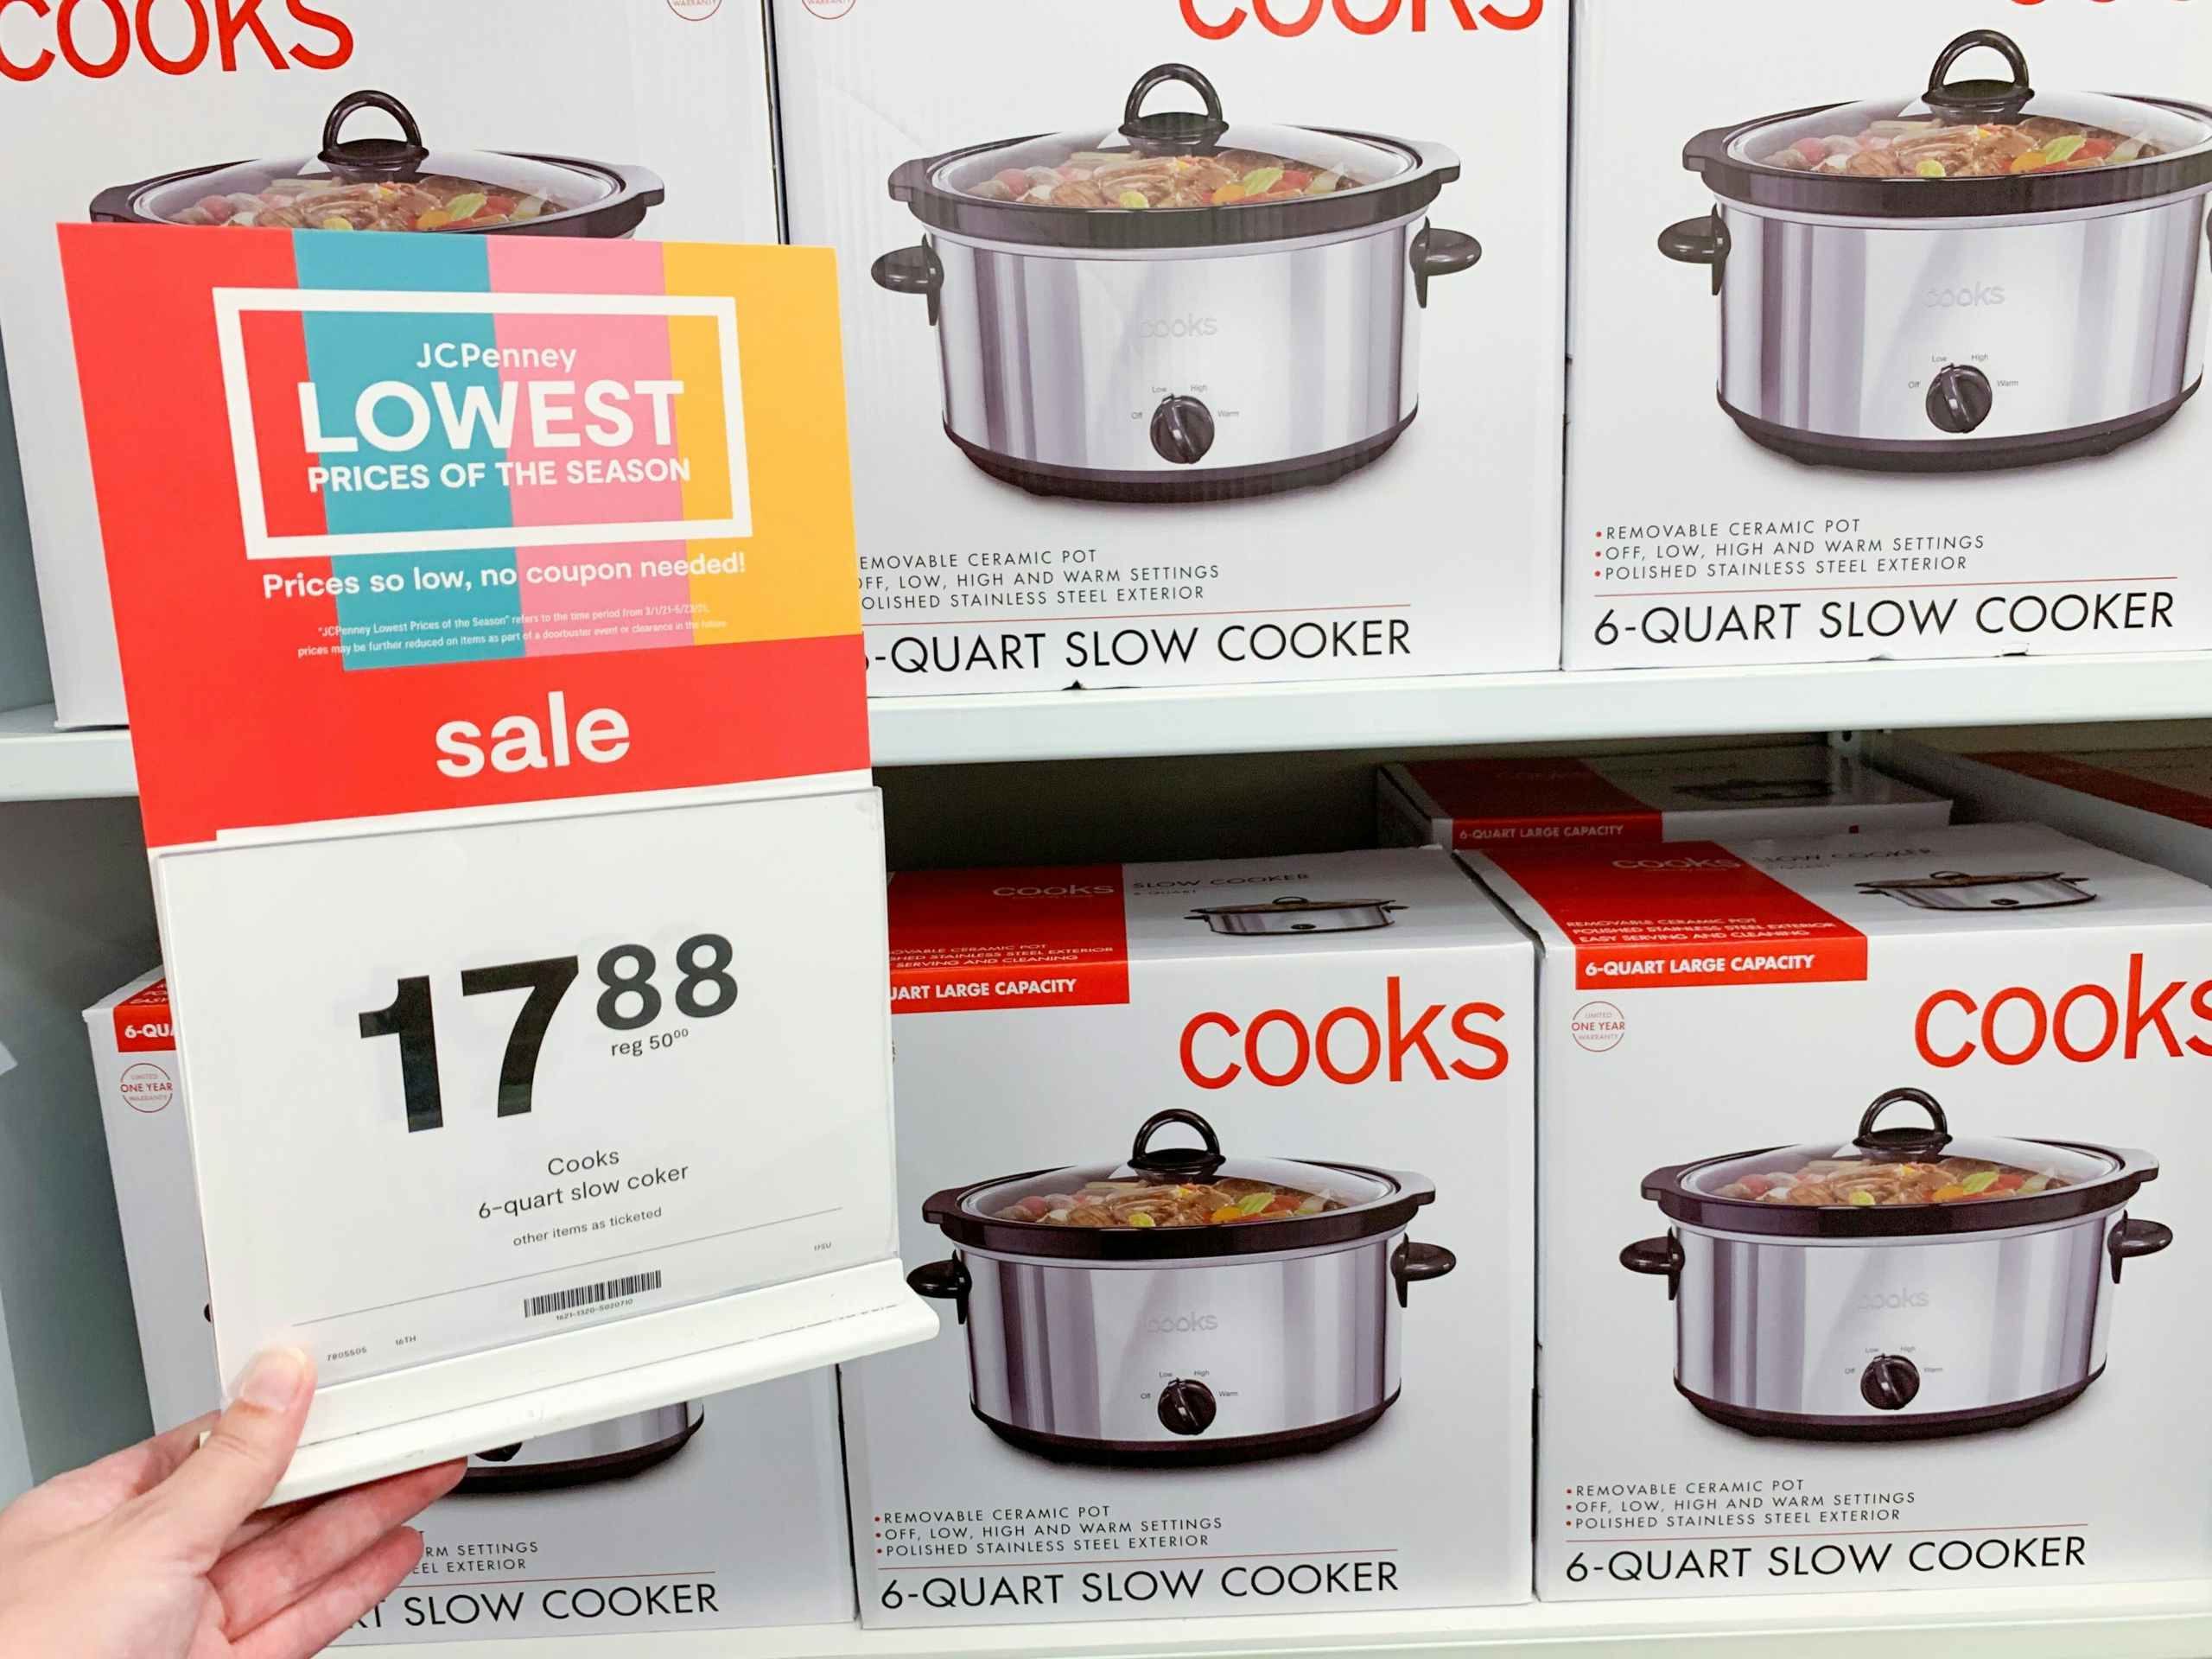 JCPenney Cook's 6-Quart Slow Cooker display